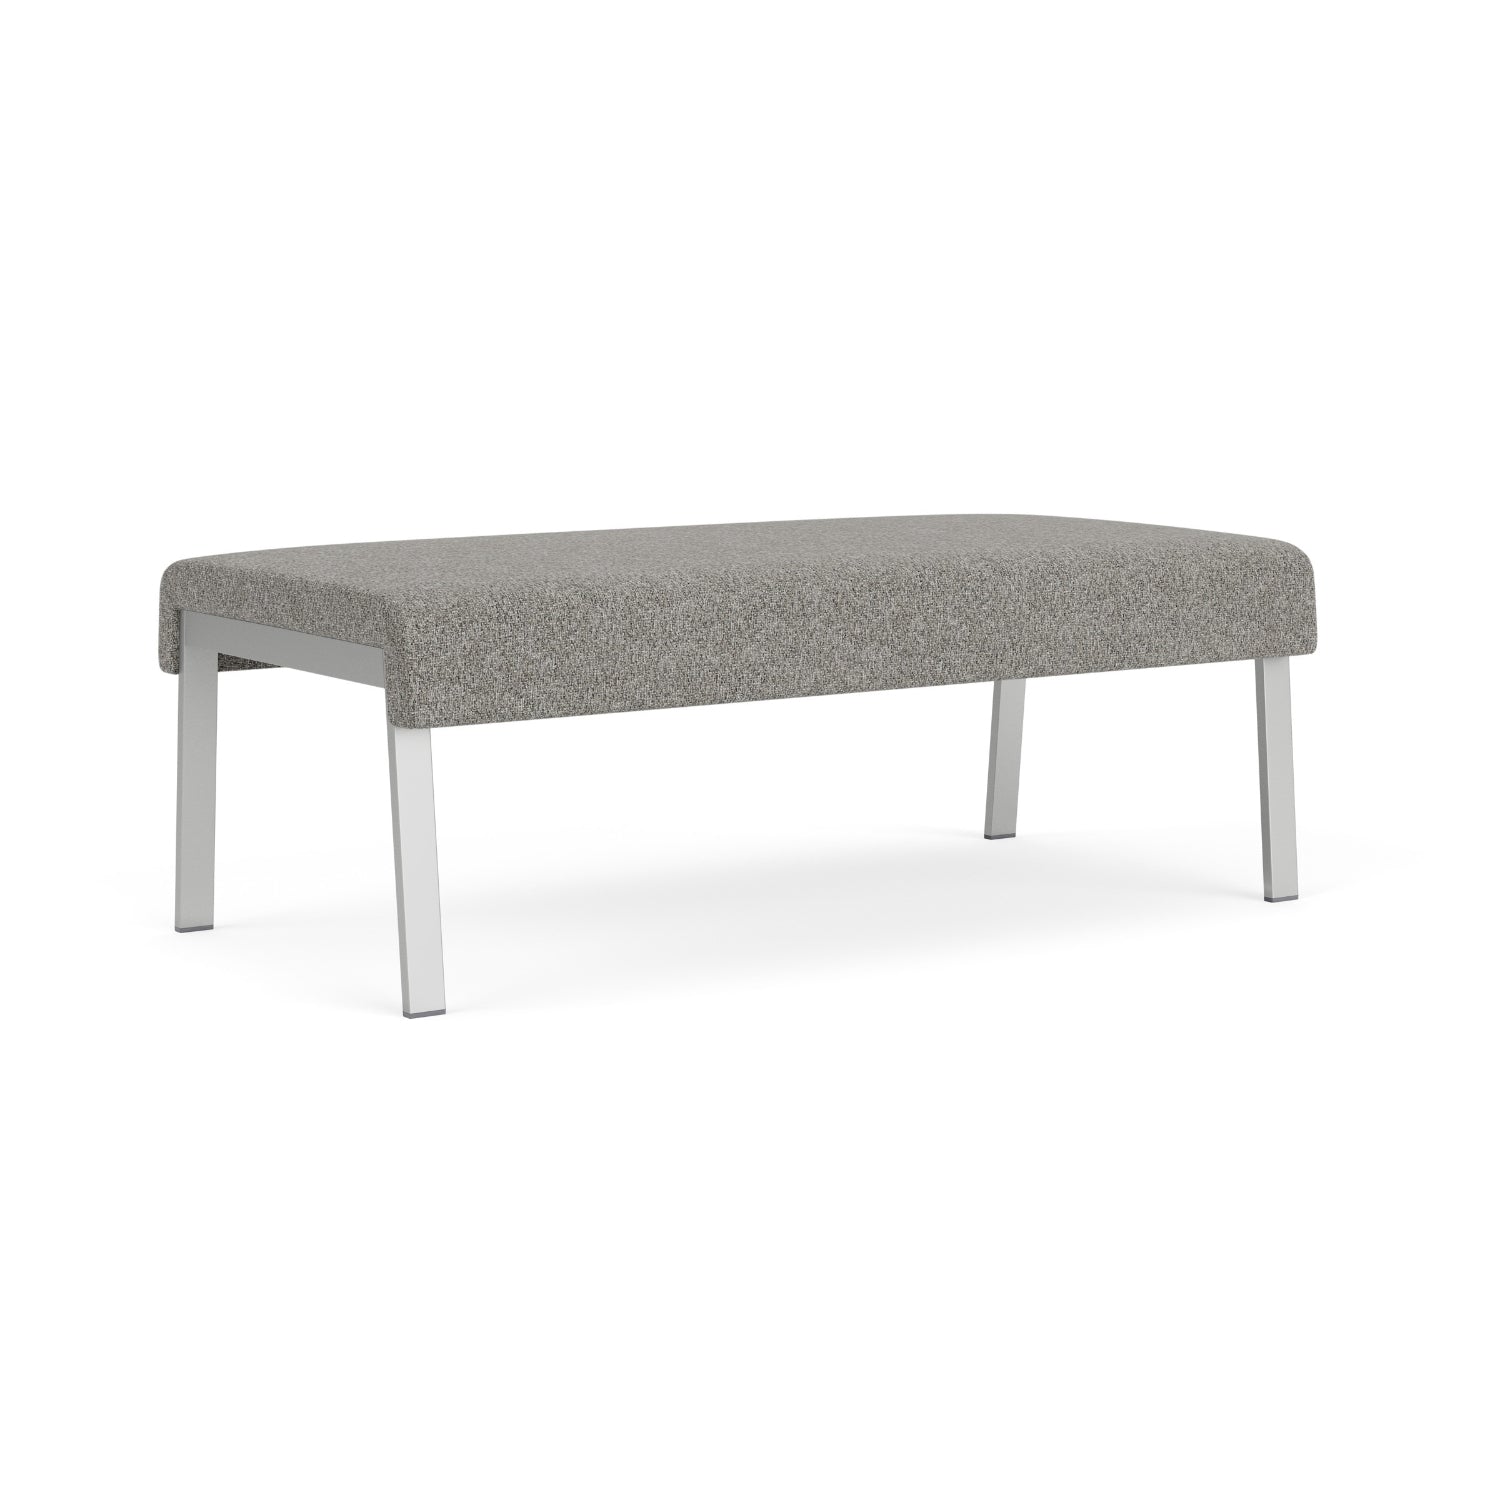 Waterfall Collection Reception Seating, 2-Seat Bench, Leg Base, Standard Fabric Upholstery, FREE SHIPPING